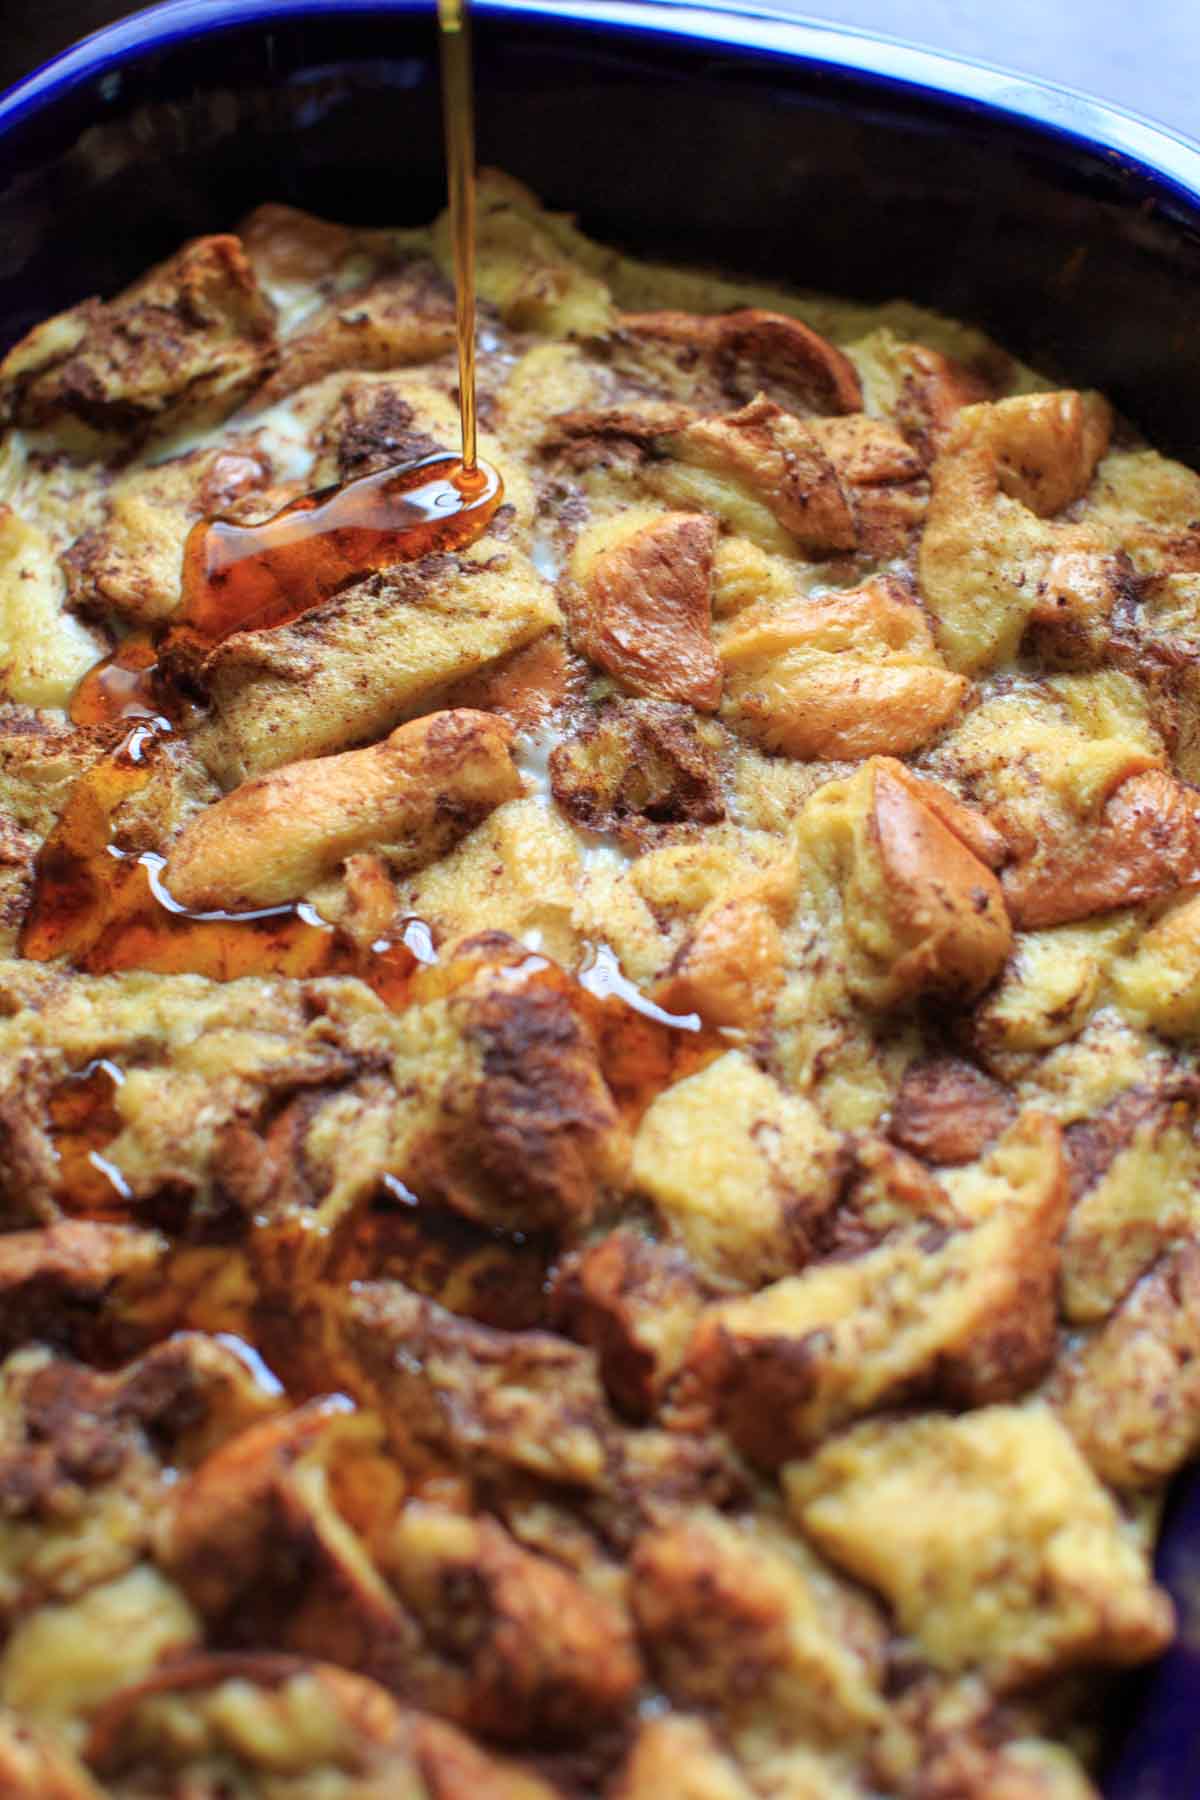 Overnight French Toast Casserole with cinnamon, vanilla and a secret ingredient. As healthy as french toast can be while still being an easy and delicious breakfast to feed a crowd.